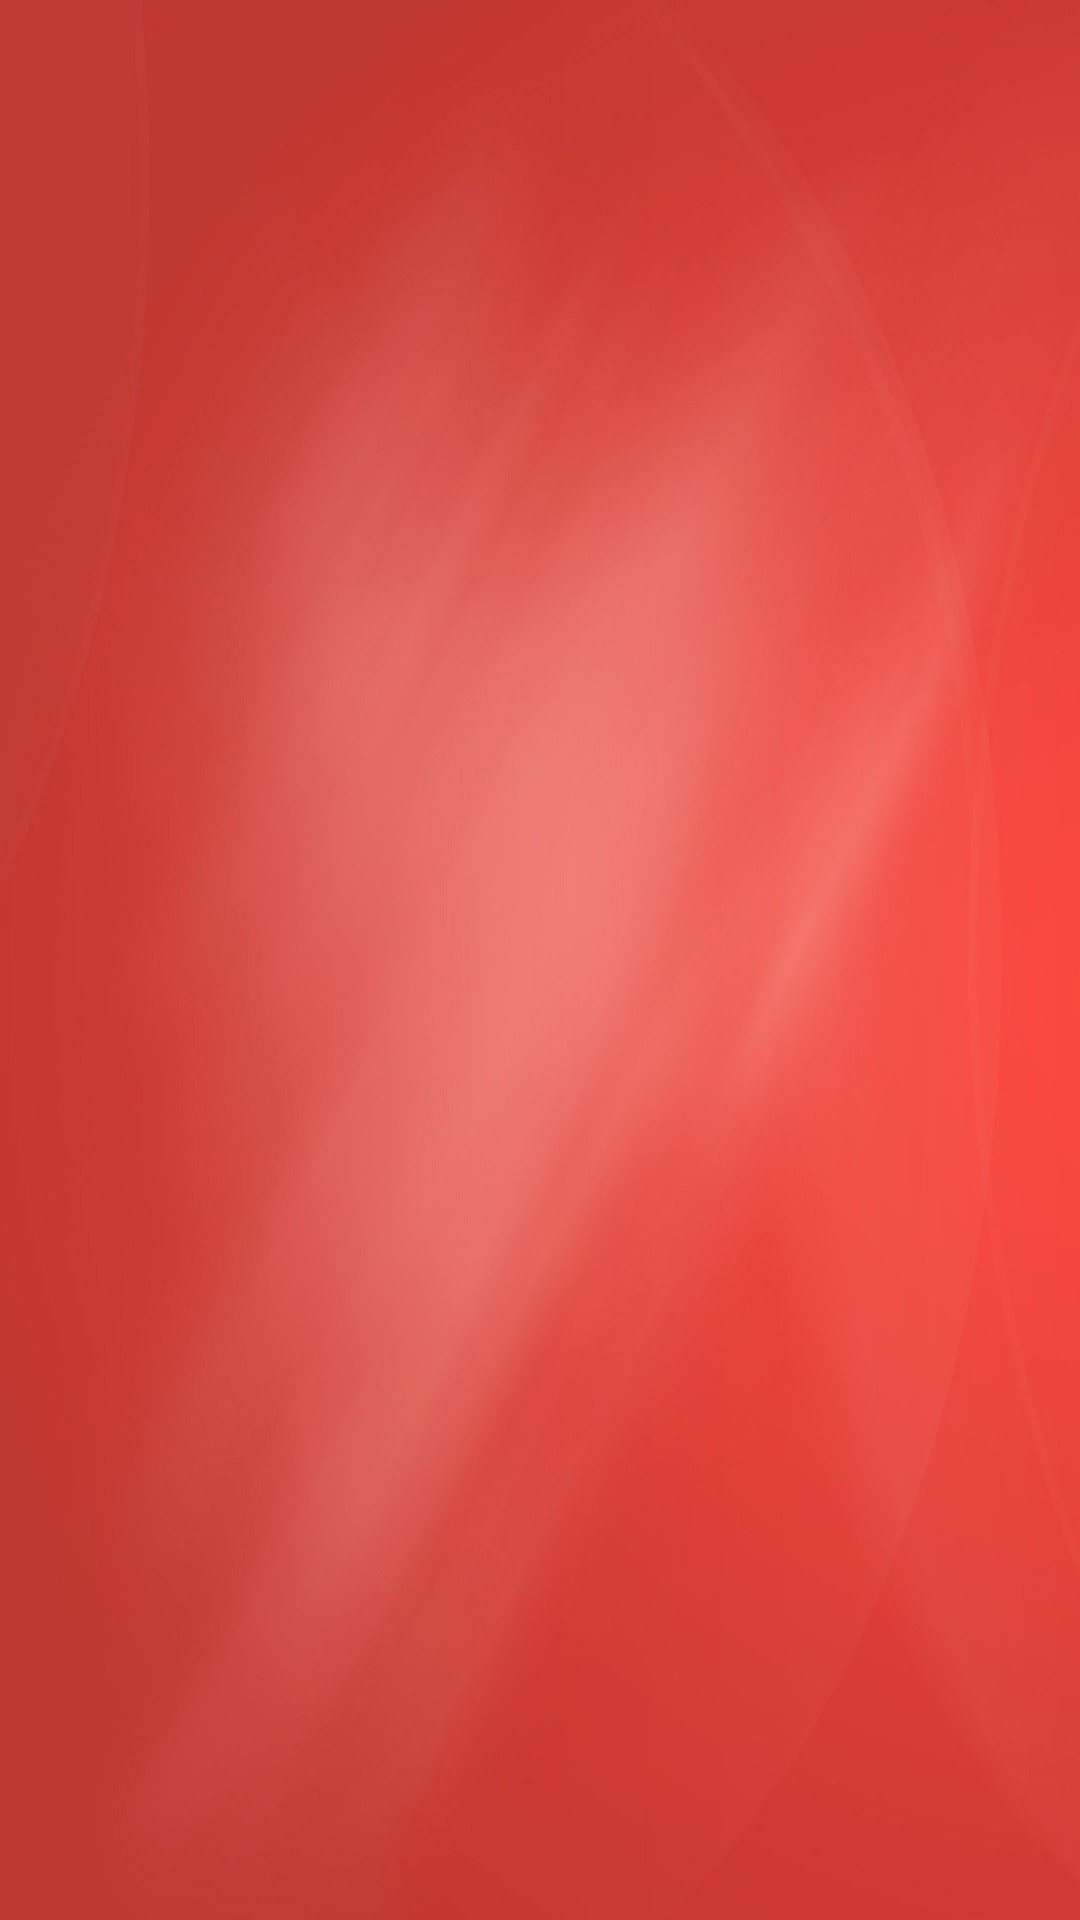 1080x1920 Simple Red Angled Gradient Android Wallpaper